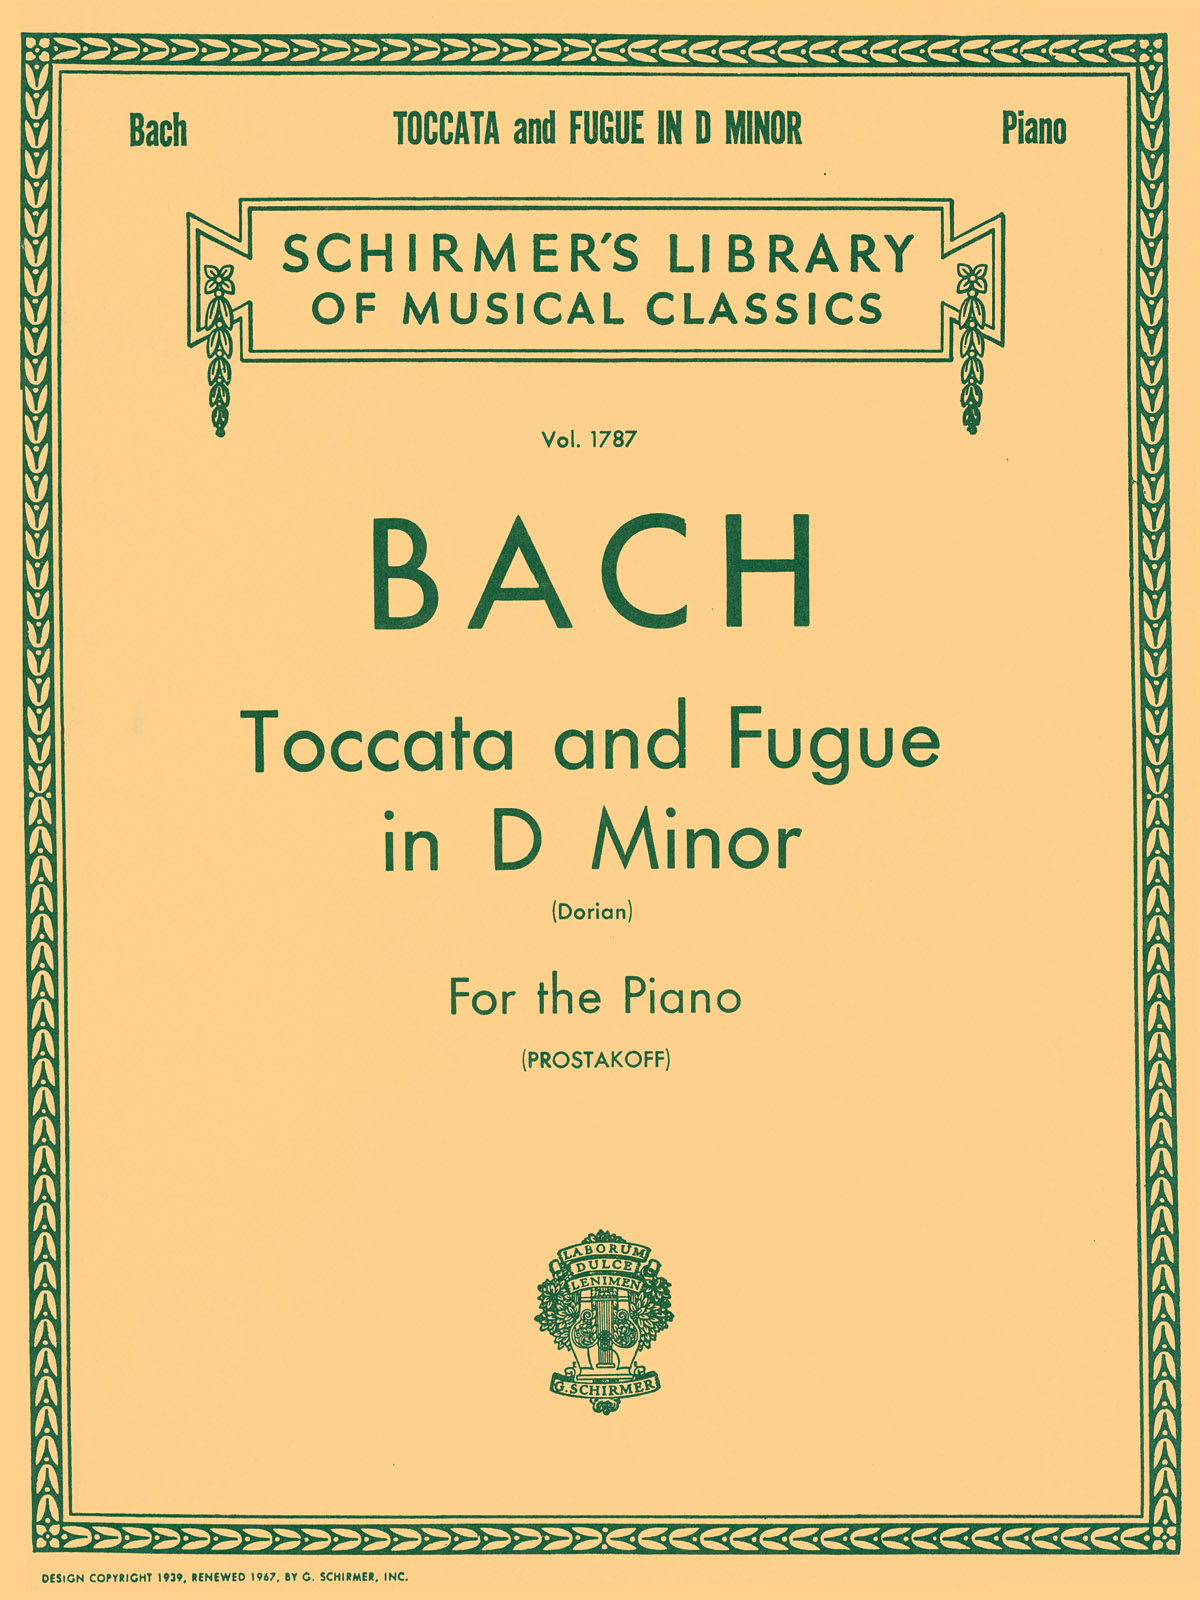 Bach: Toccata and Fugue in D Minor